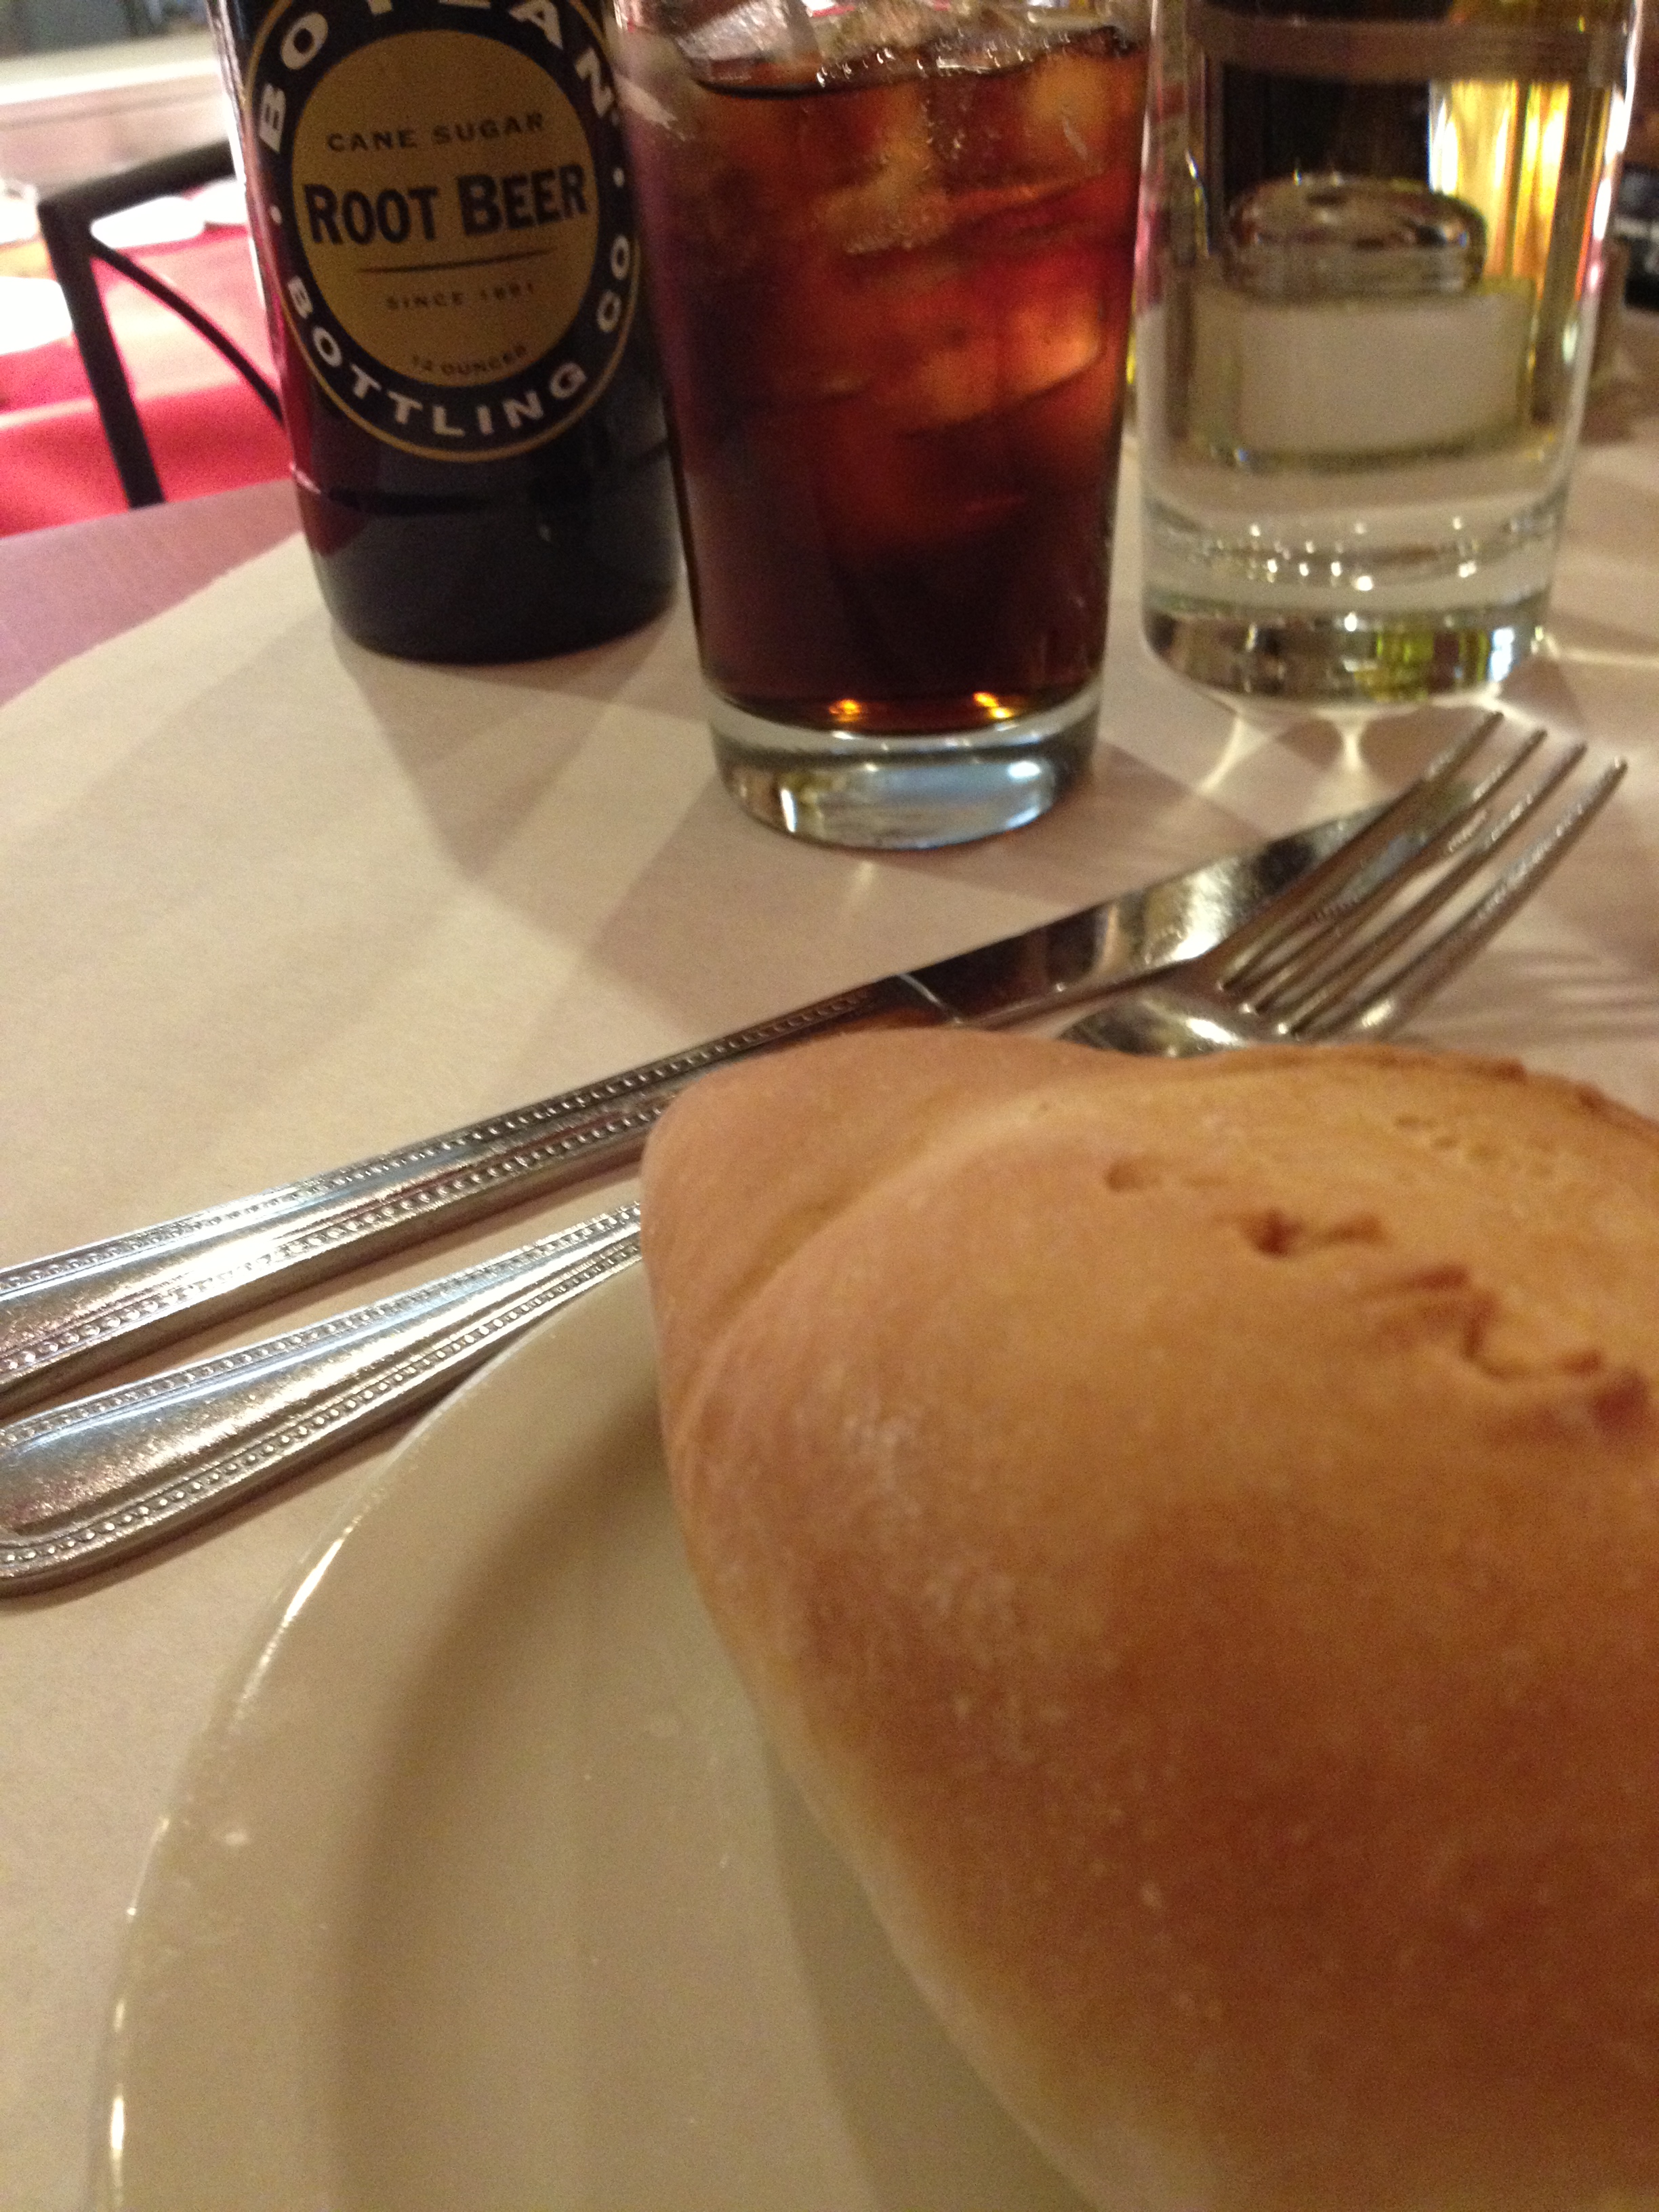 Boylan's and hot bread...who could ask for more?